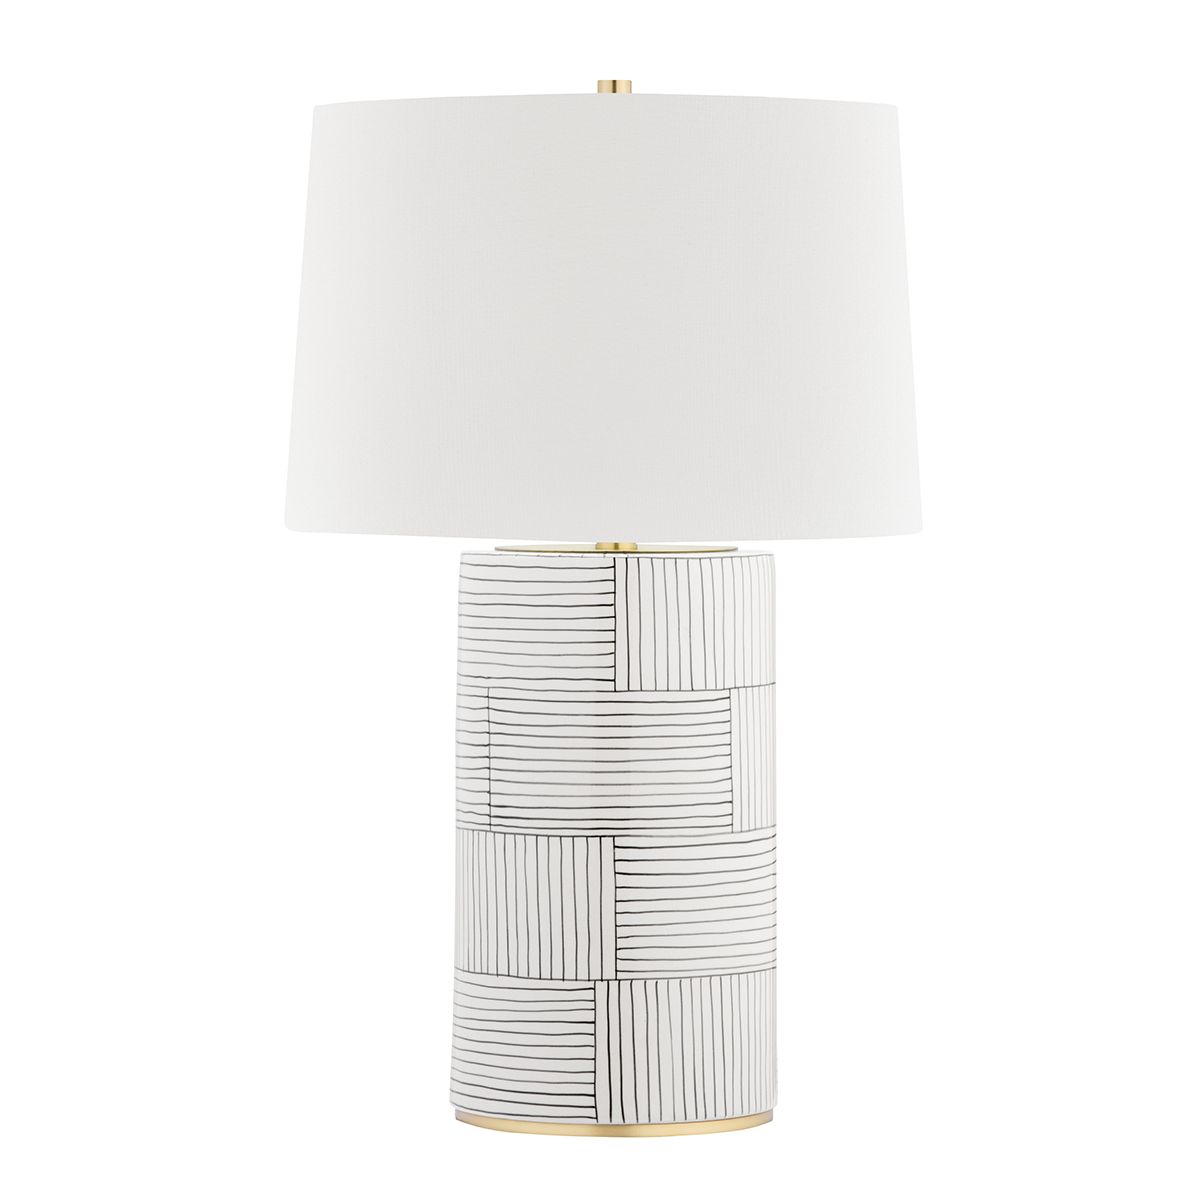 Borneo Table Lamp Aged Brass with White Stripes Combo Finish